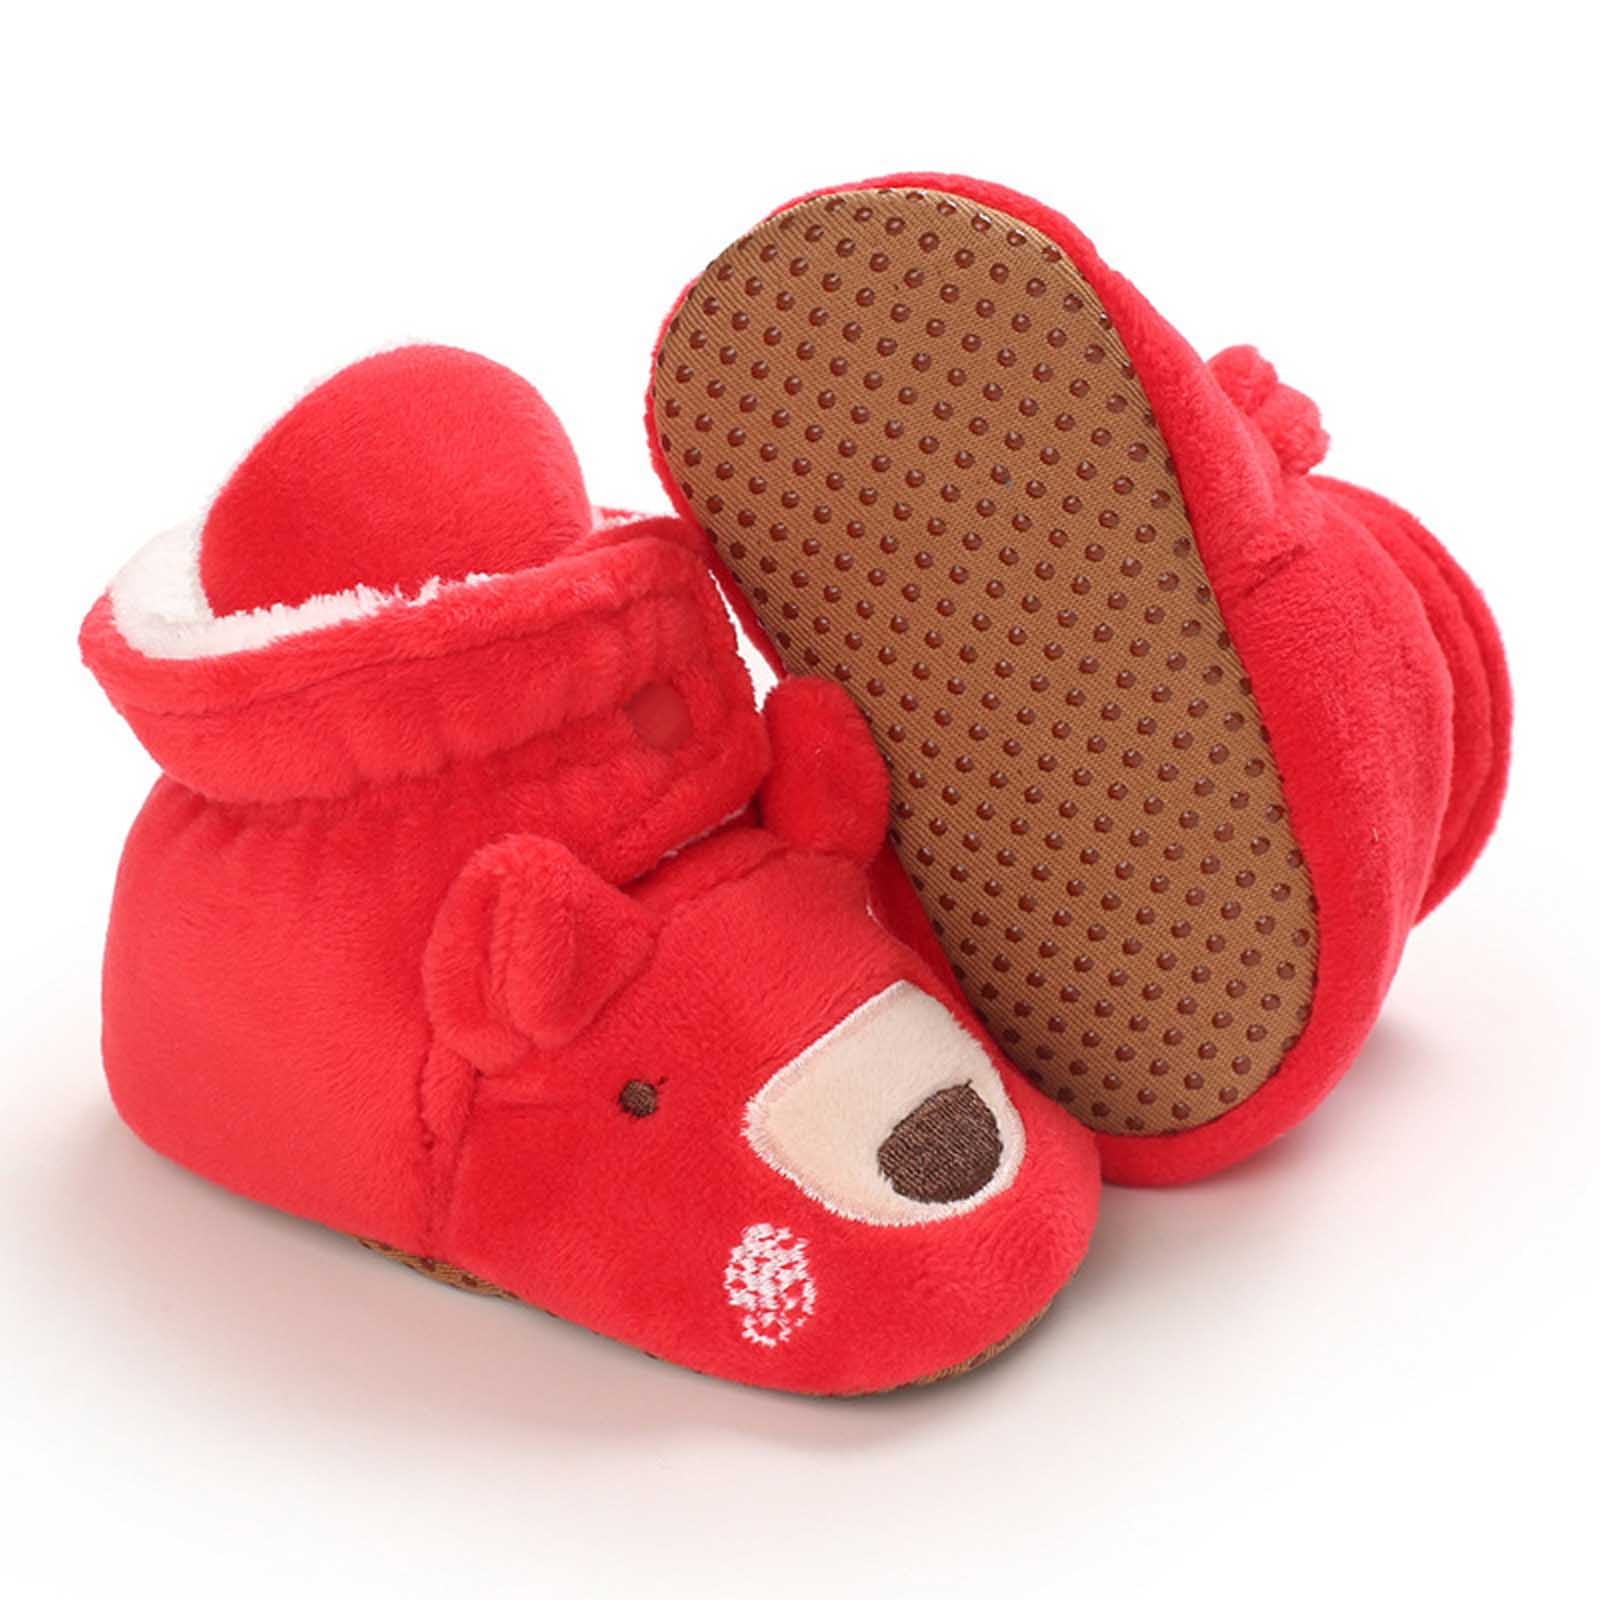 Lanhui Baby Shoes Anti-Slip Soft Sole Sneaker Toddler Colorful Canvas Shoes 